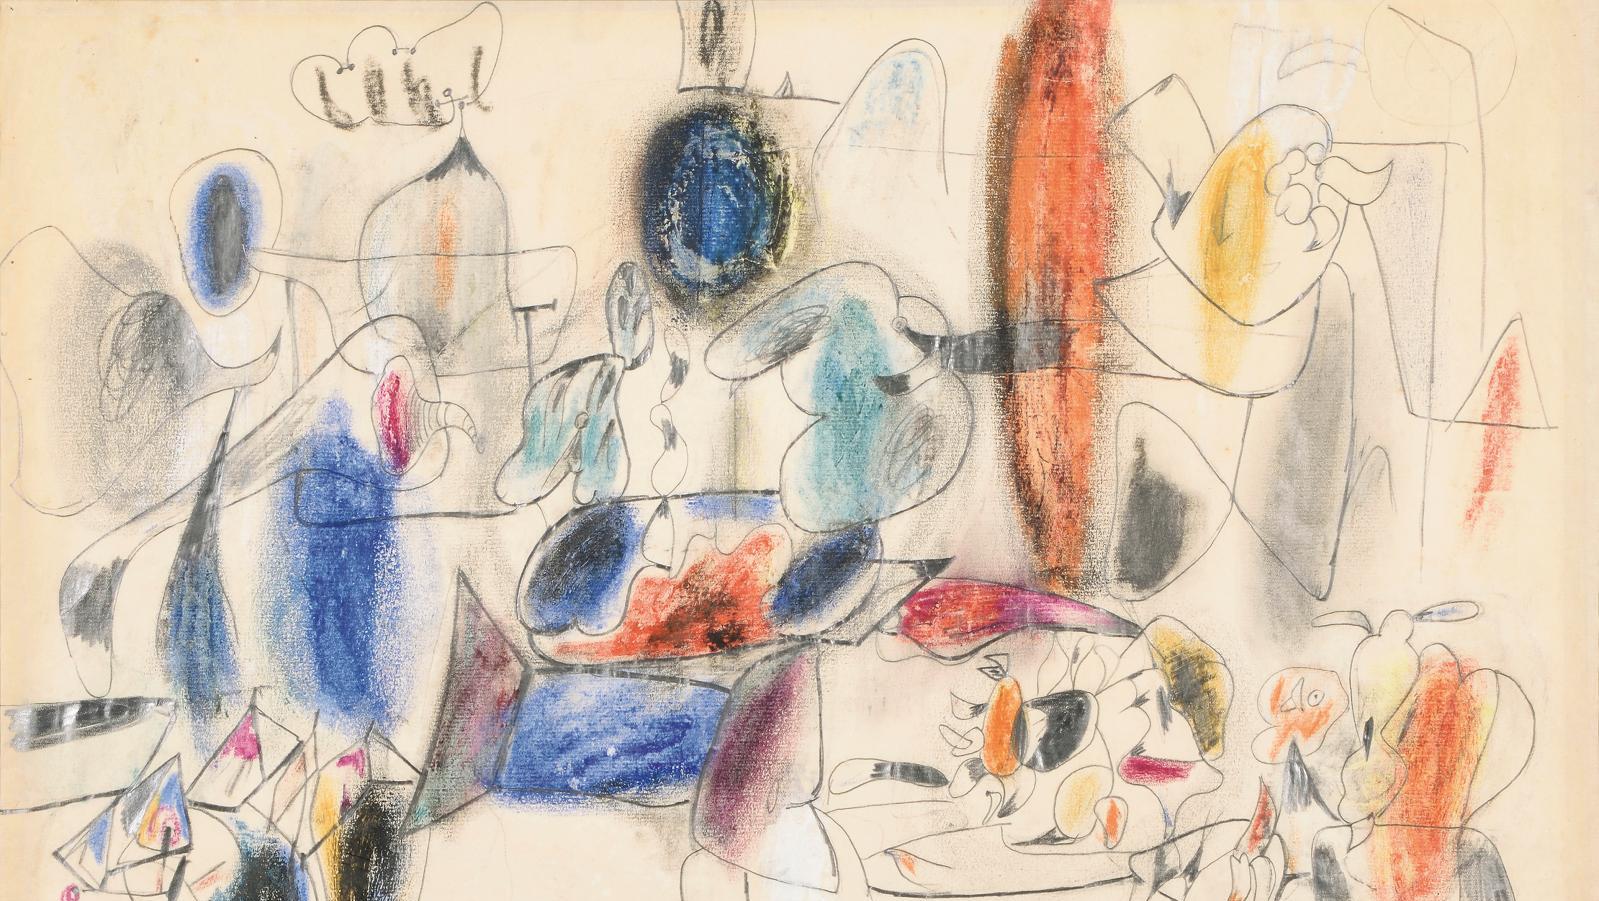 Arshile Gorky (1904-1948), Untitled, graphite and pencil on paper, 1943, 43.2 cm... Gorky and De Chirico Reach New Heights